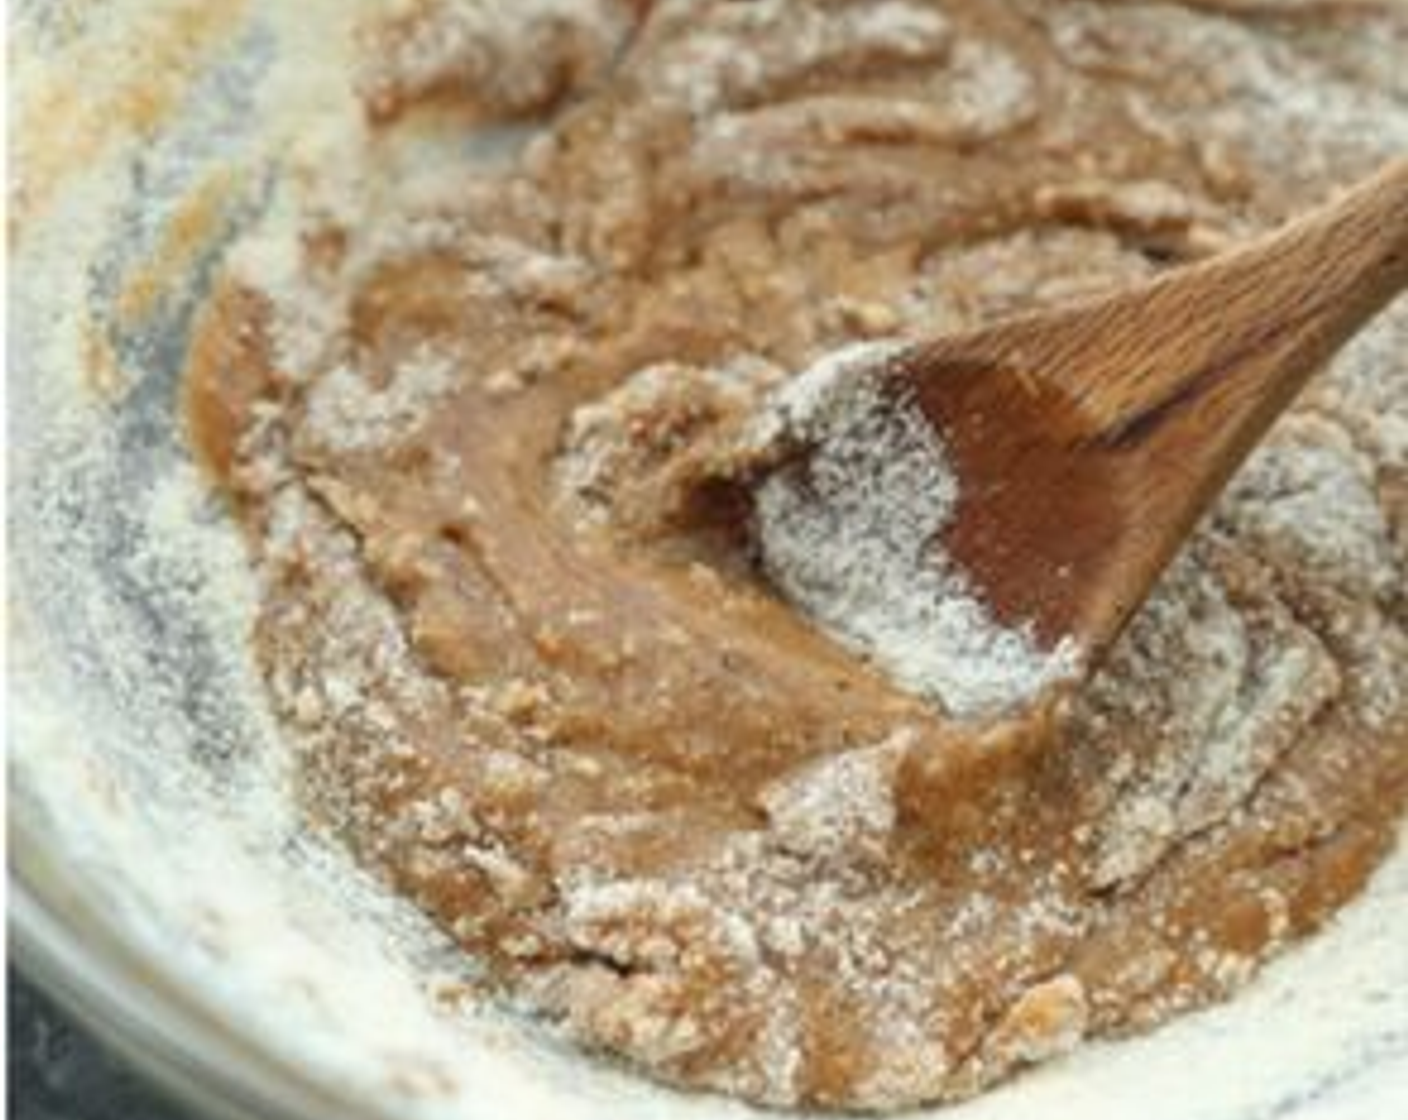 step 2 In a medium mixing bowl, combine the Coconut Oil (1/4 cup), Coconut Sugar (1/3 cup), Egg (1), Almond Butter (2 Tbsp), and Pure Vanilla Extract (1 tsp). Beat until smooth.